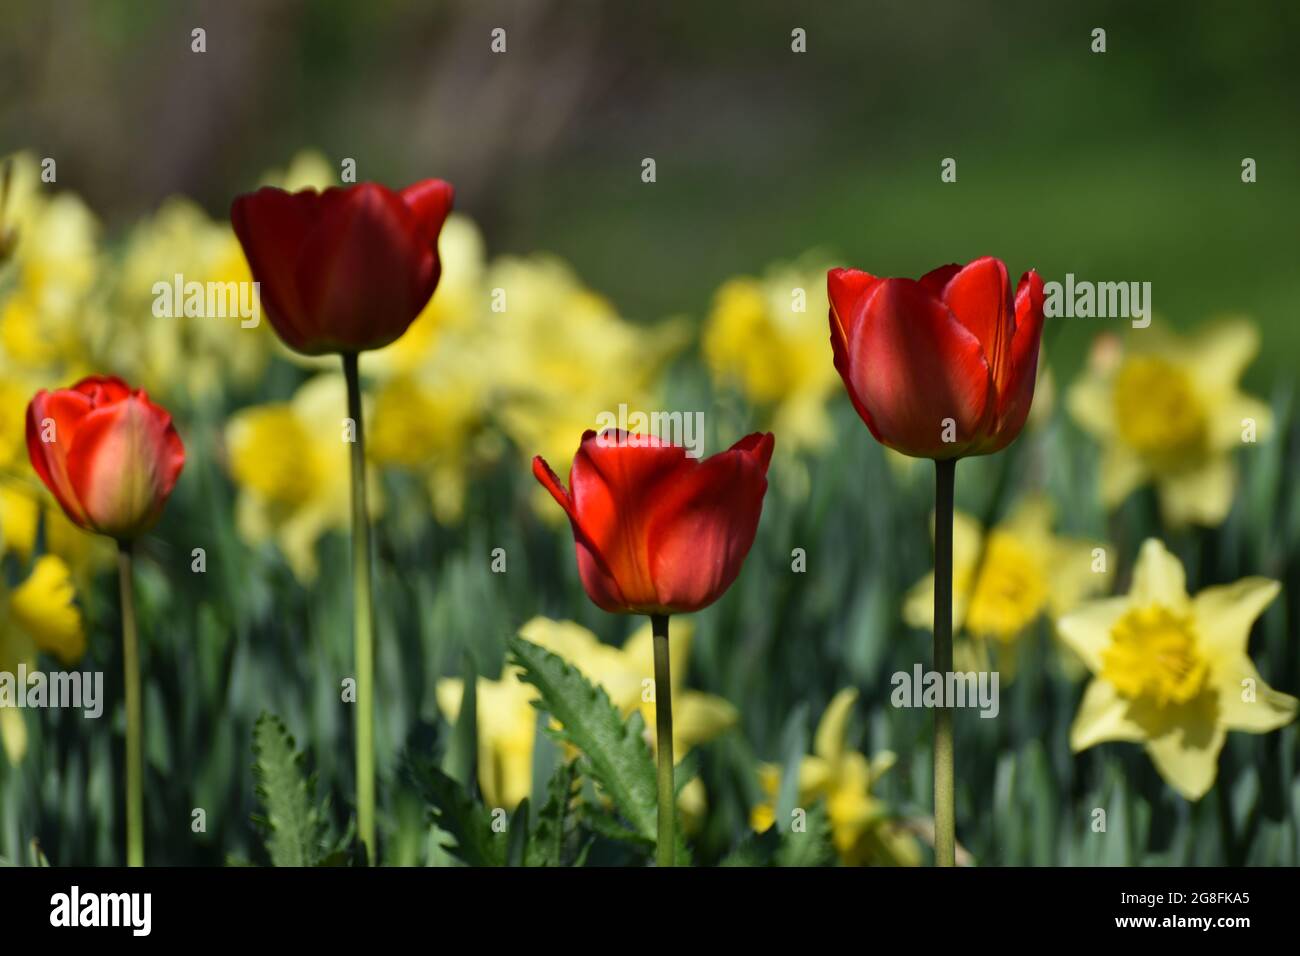 Tulip flowers and daffodils in the garden Stock Photo - Alamy